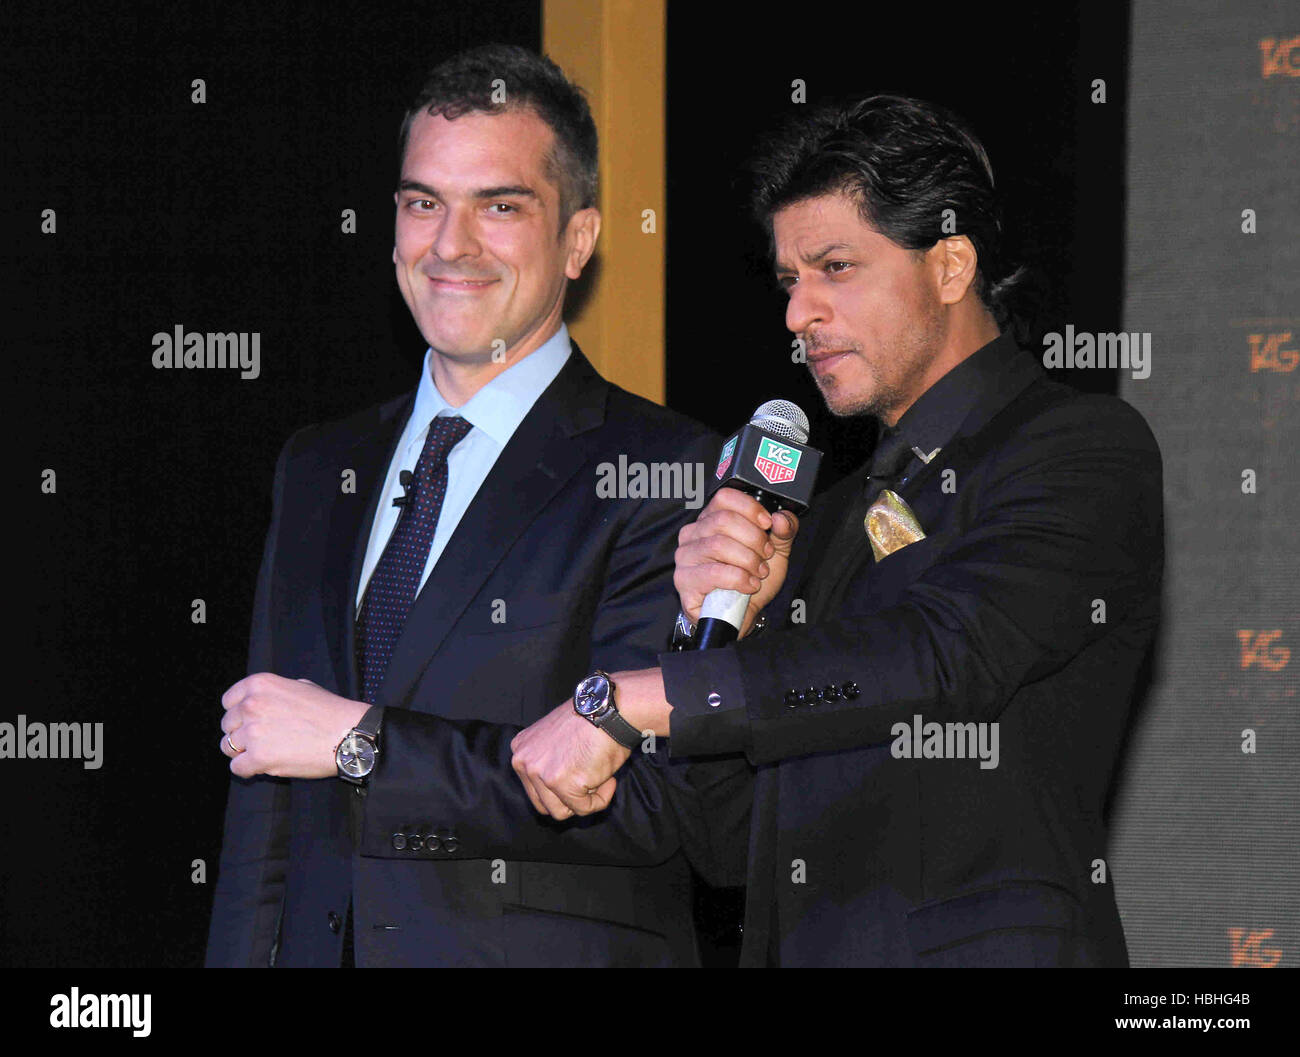 Bollywood Shah Rukh Khan speaking showing his Tag Heuer's Golden Carrera watch given by Franck Dardenne General Manager of Tag Heuer in Mumbai India Stock Photo